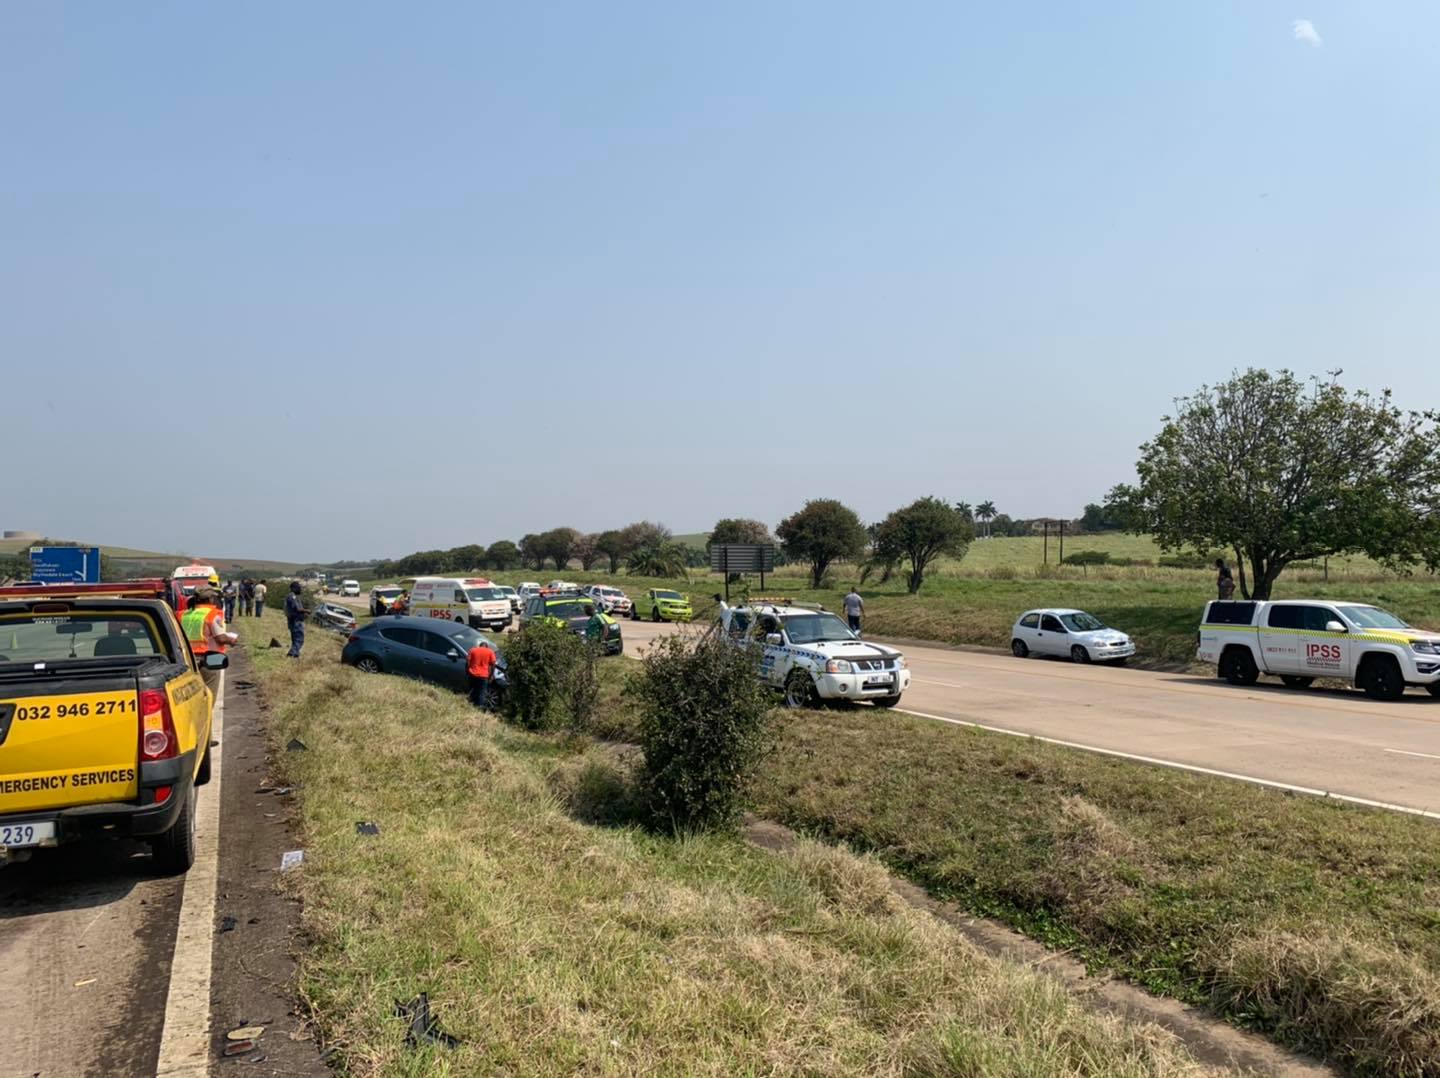 7 Injured in a 4-vehicle-collision on the N2, Stanger